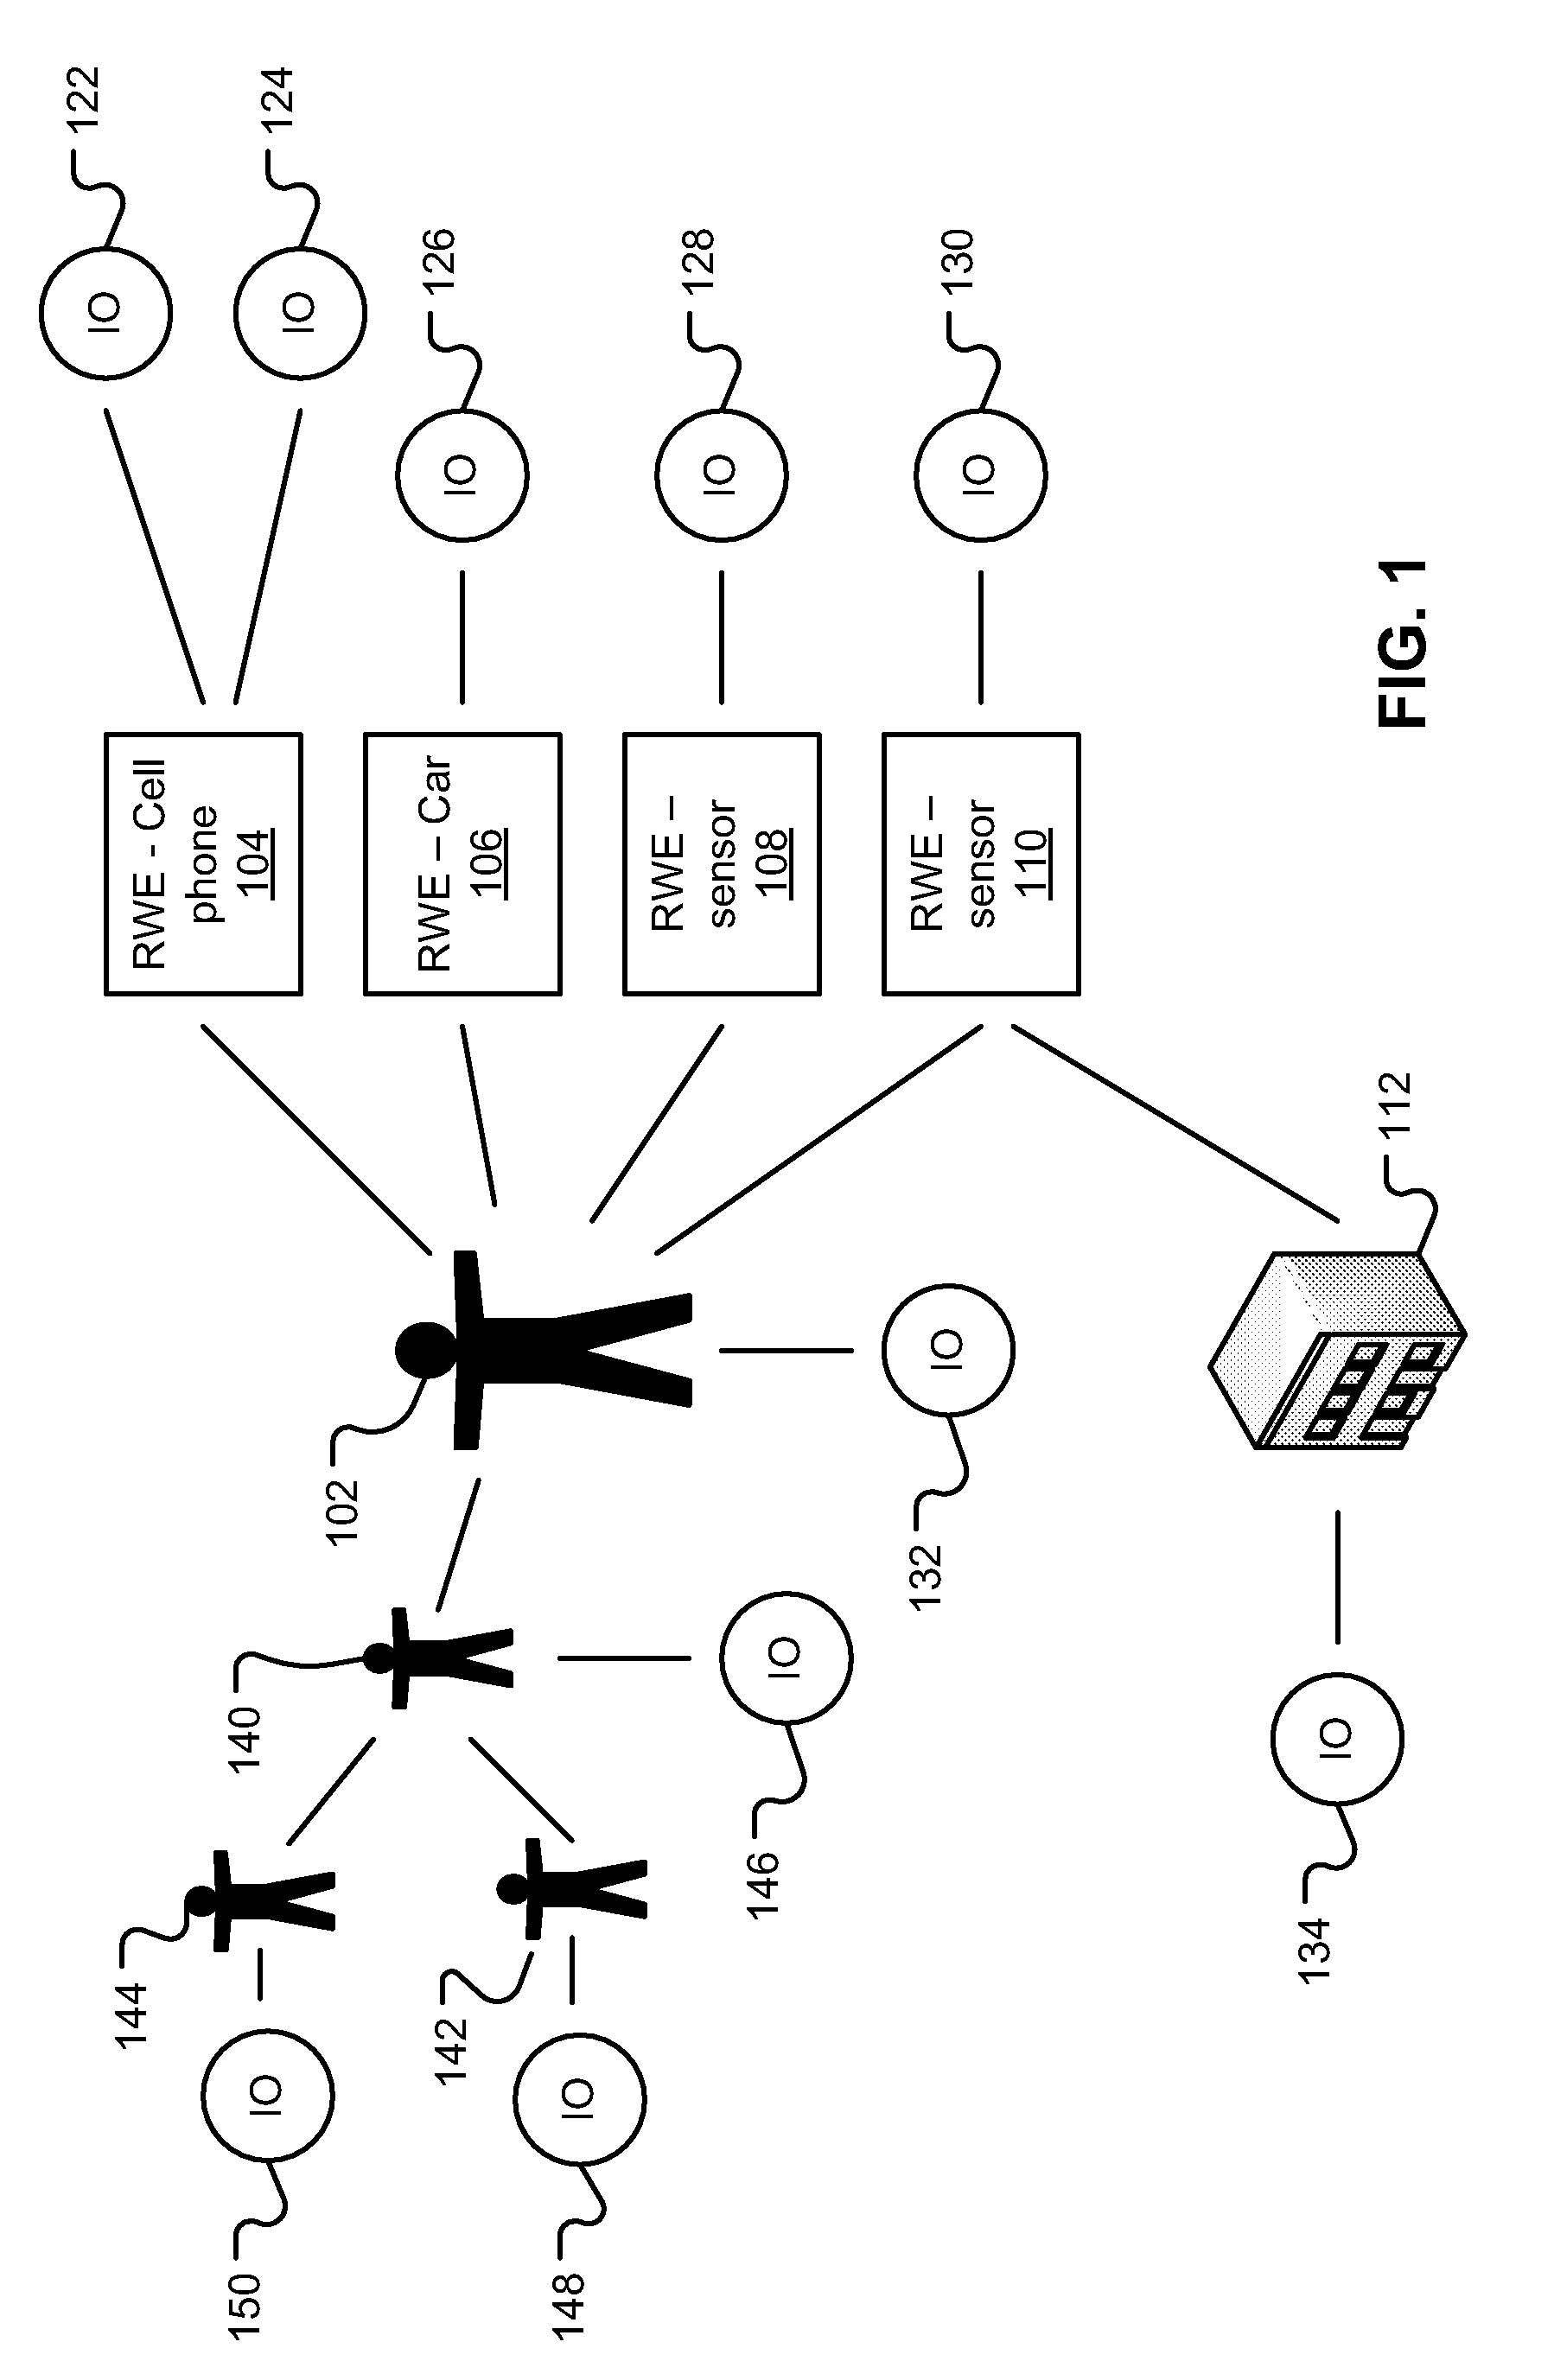 System and method for distributing media related to a location